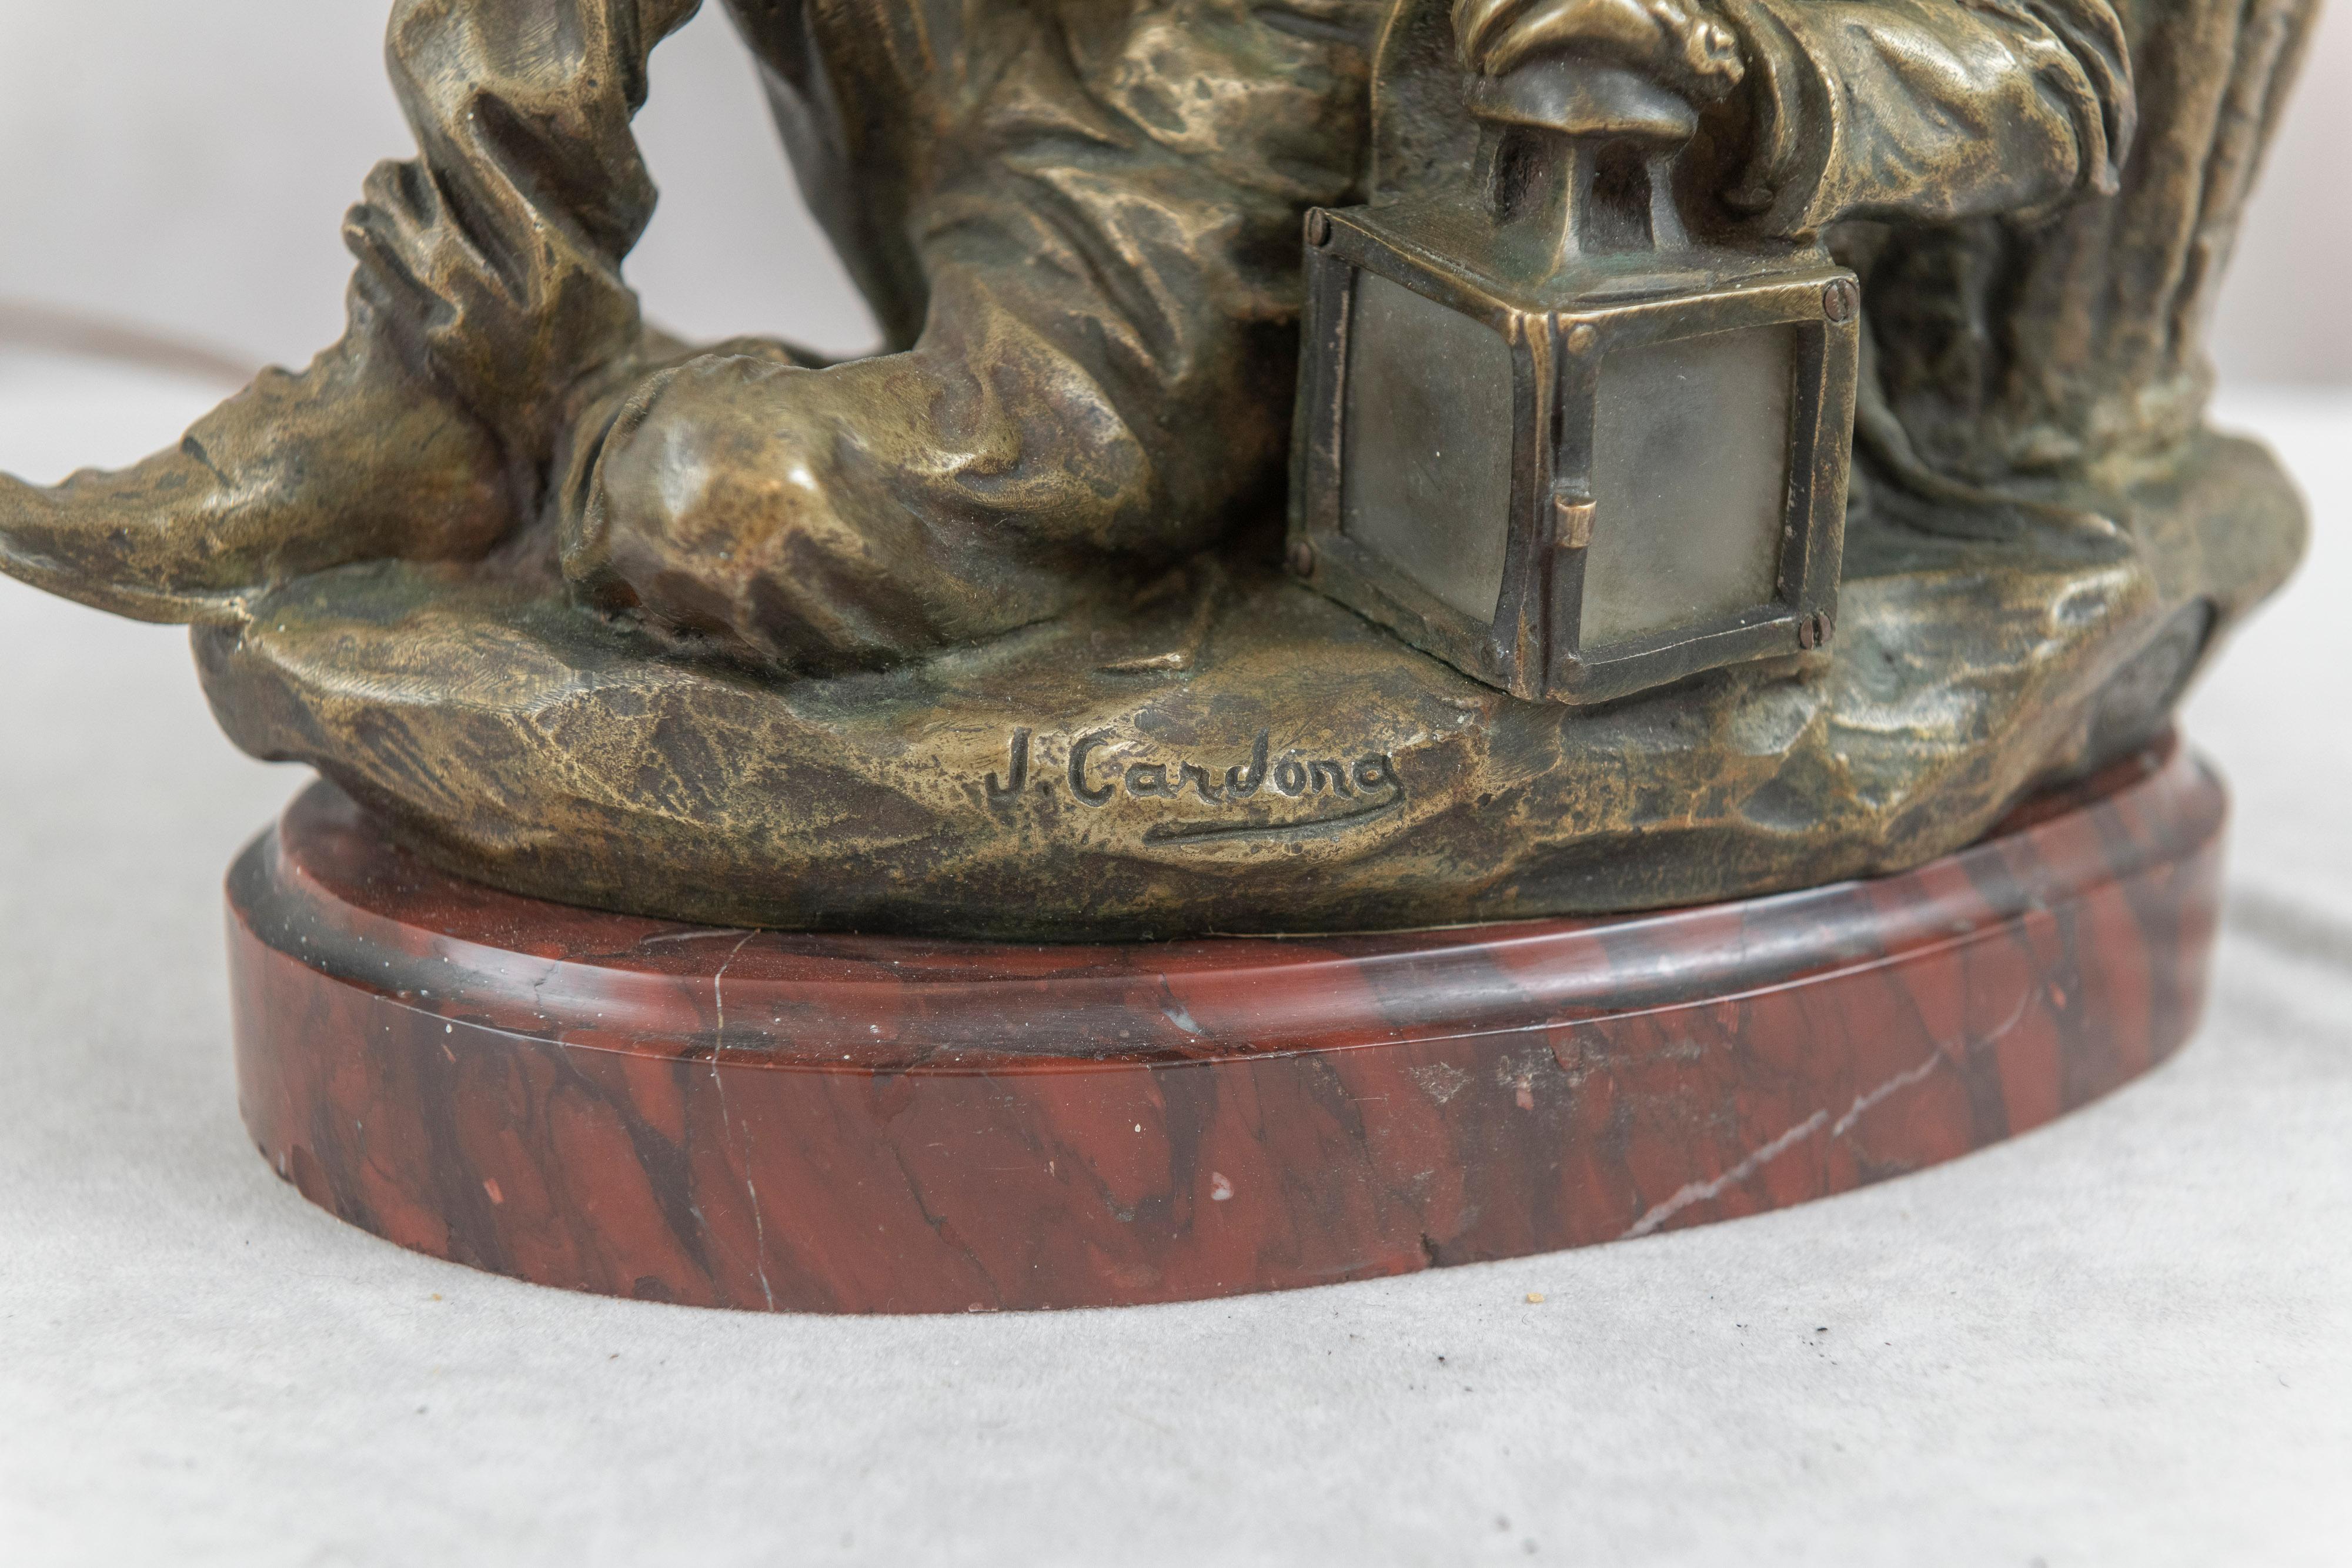 This very sweet bronze depicting a young boy bundled up for a cold night and seated next to his lantern was cast in France by the listed artist Jose Cardona, who worked mainly just after the turn of the century. Artist signed and also bearing a